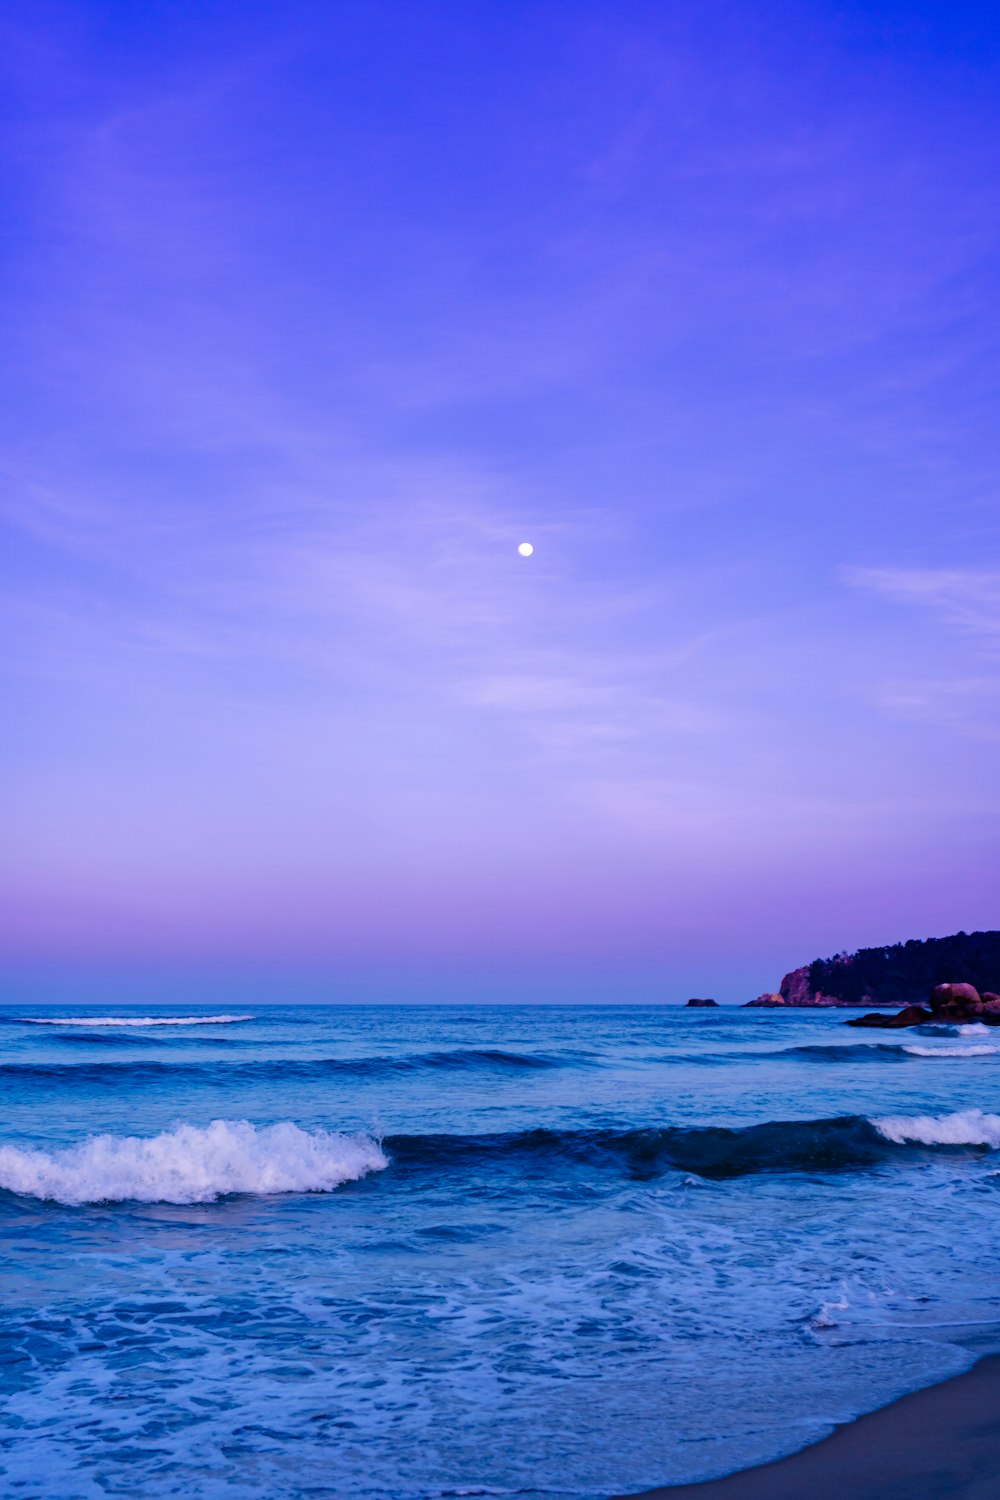 a beach with waves and a full moon in the sky